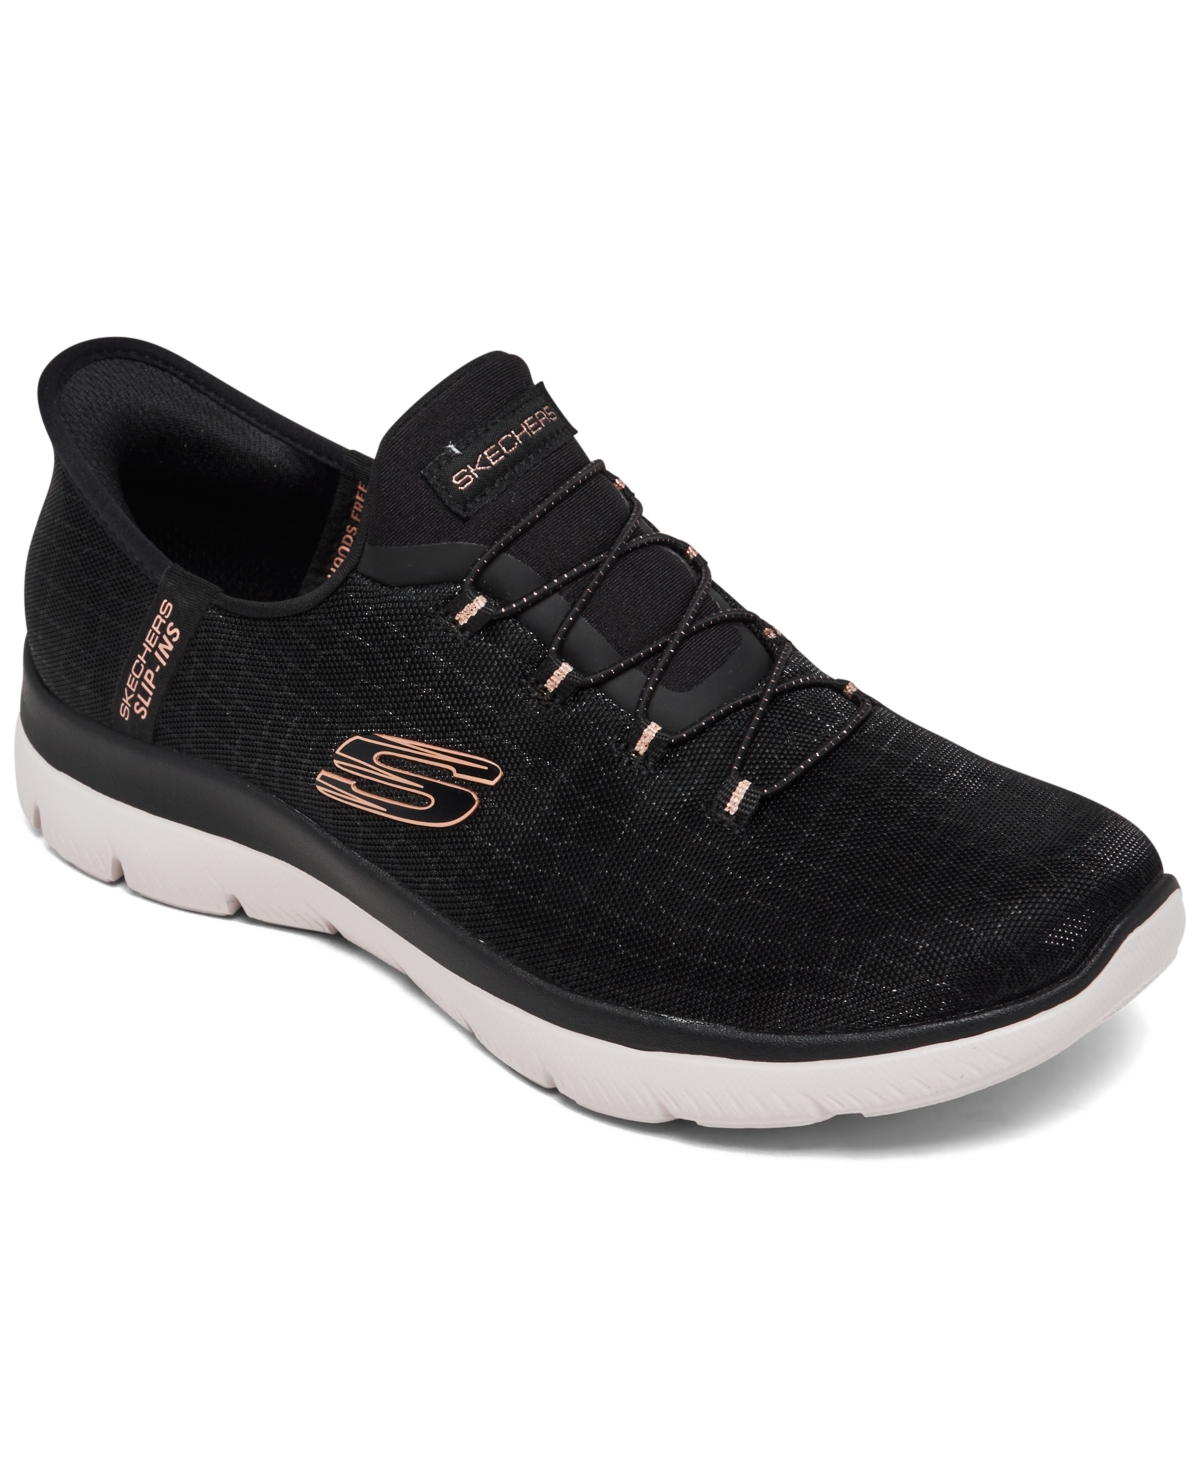 Women's Slip-Ins- Summit - Classy Night Casual Sneakers from Finish Line - Black, Rose Gold